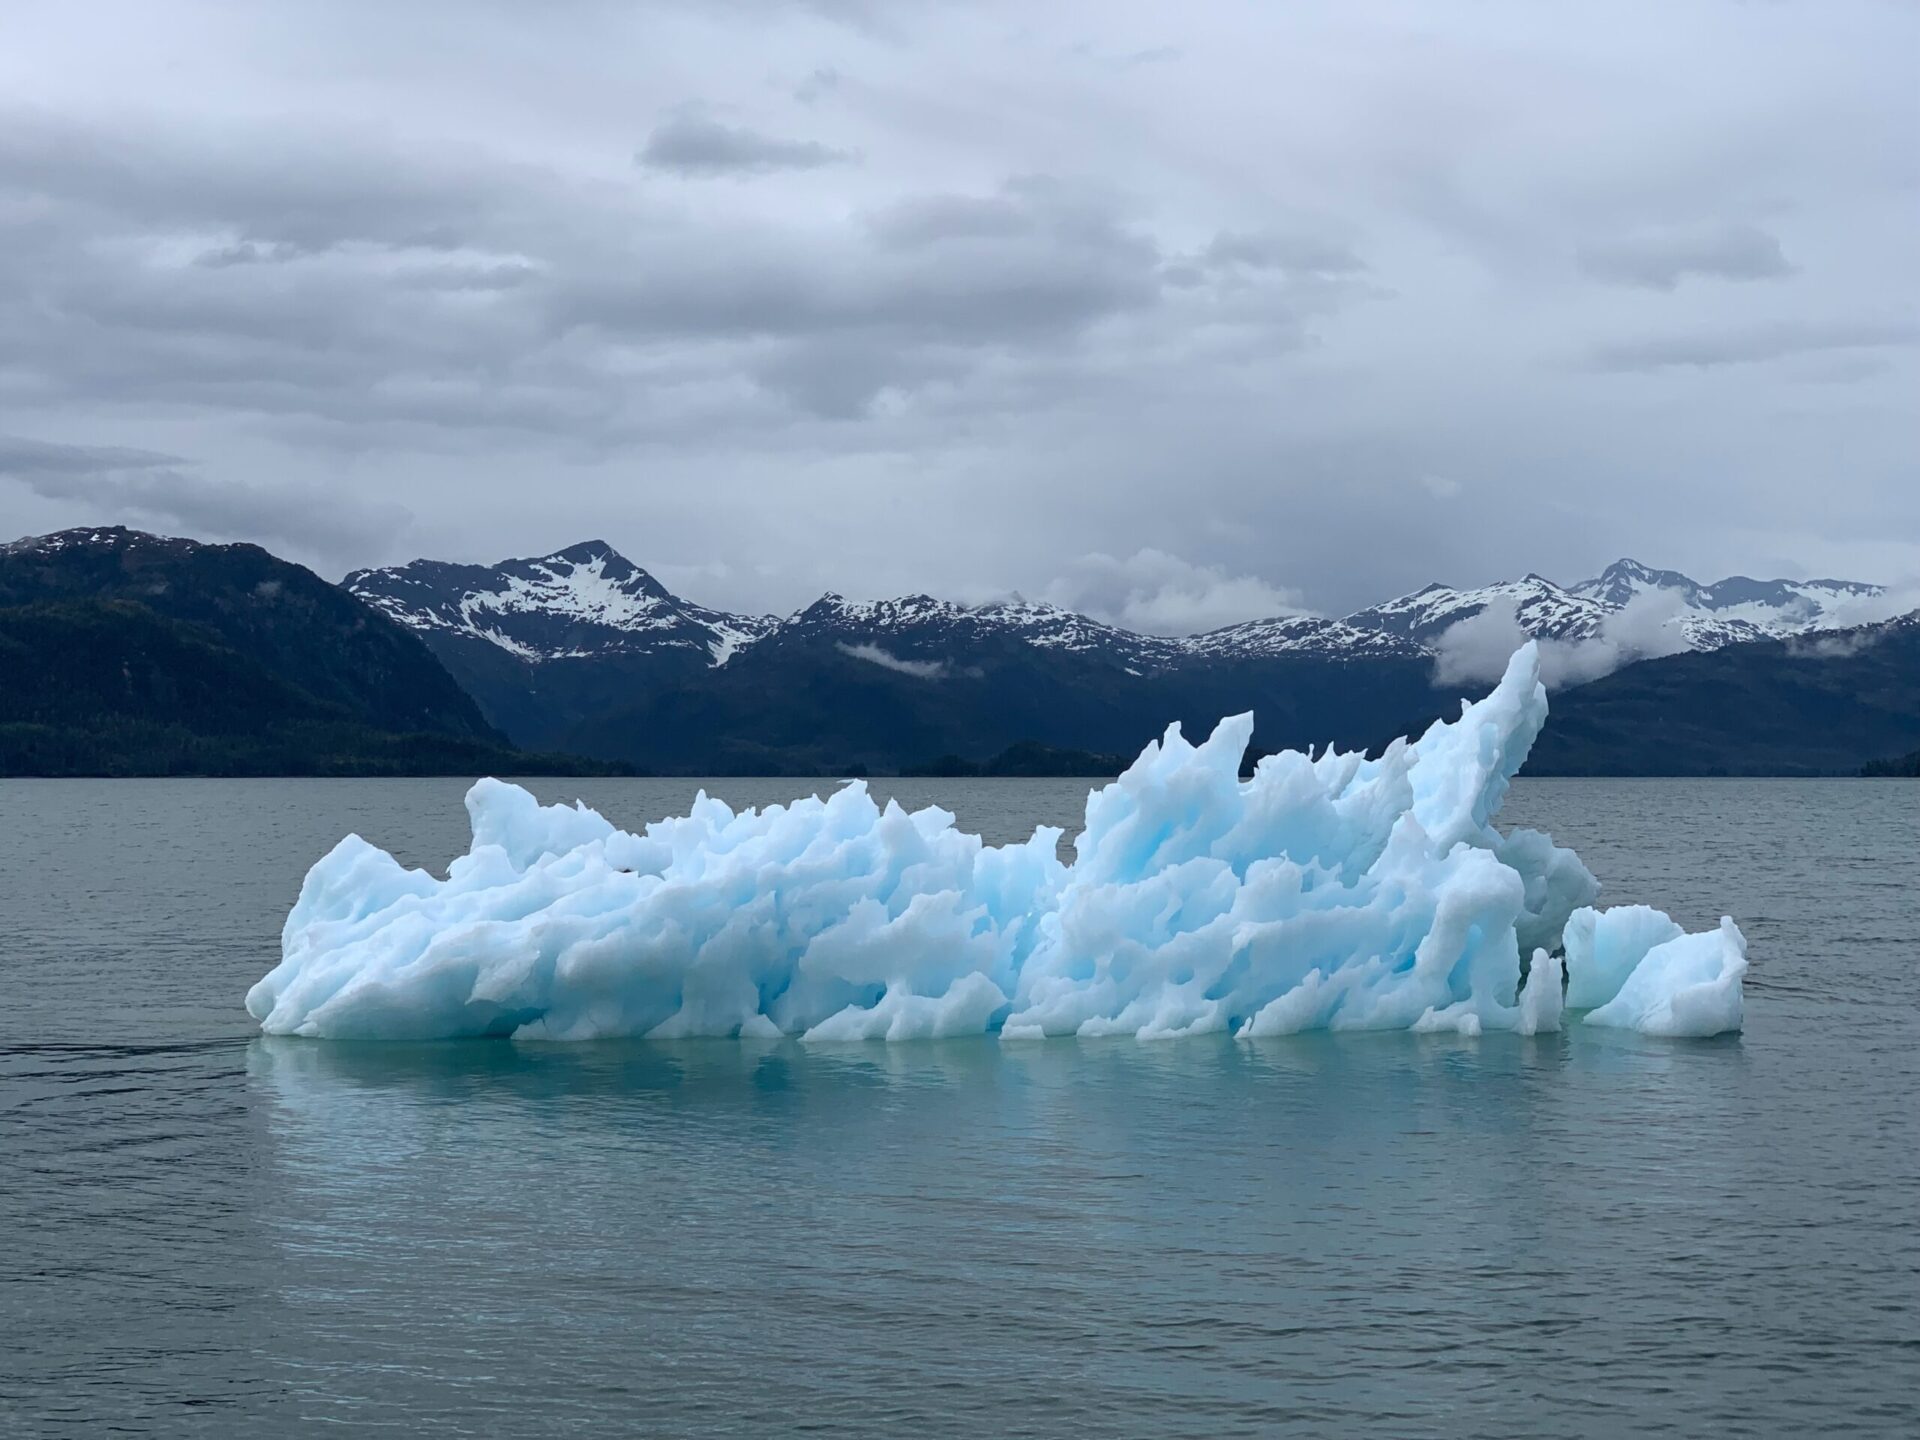 a white jagged iceburg floats in grey waters in front of blue snowy mountains, with a cloudy sky